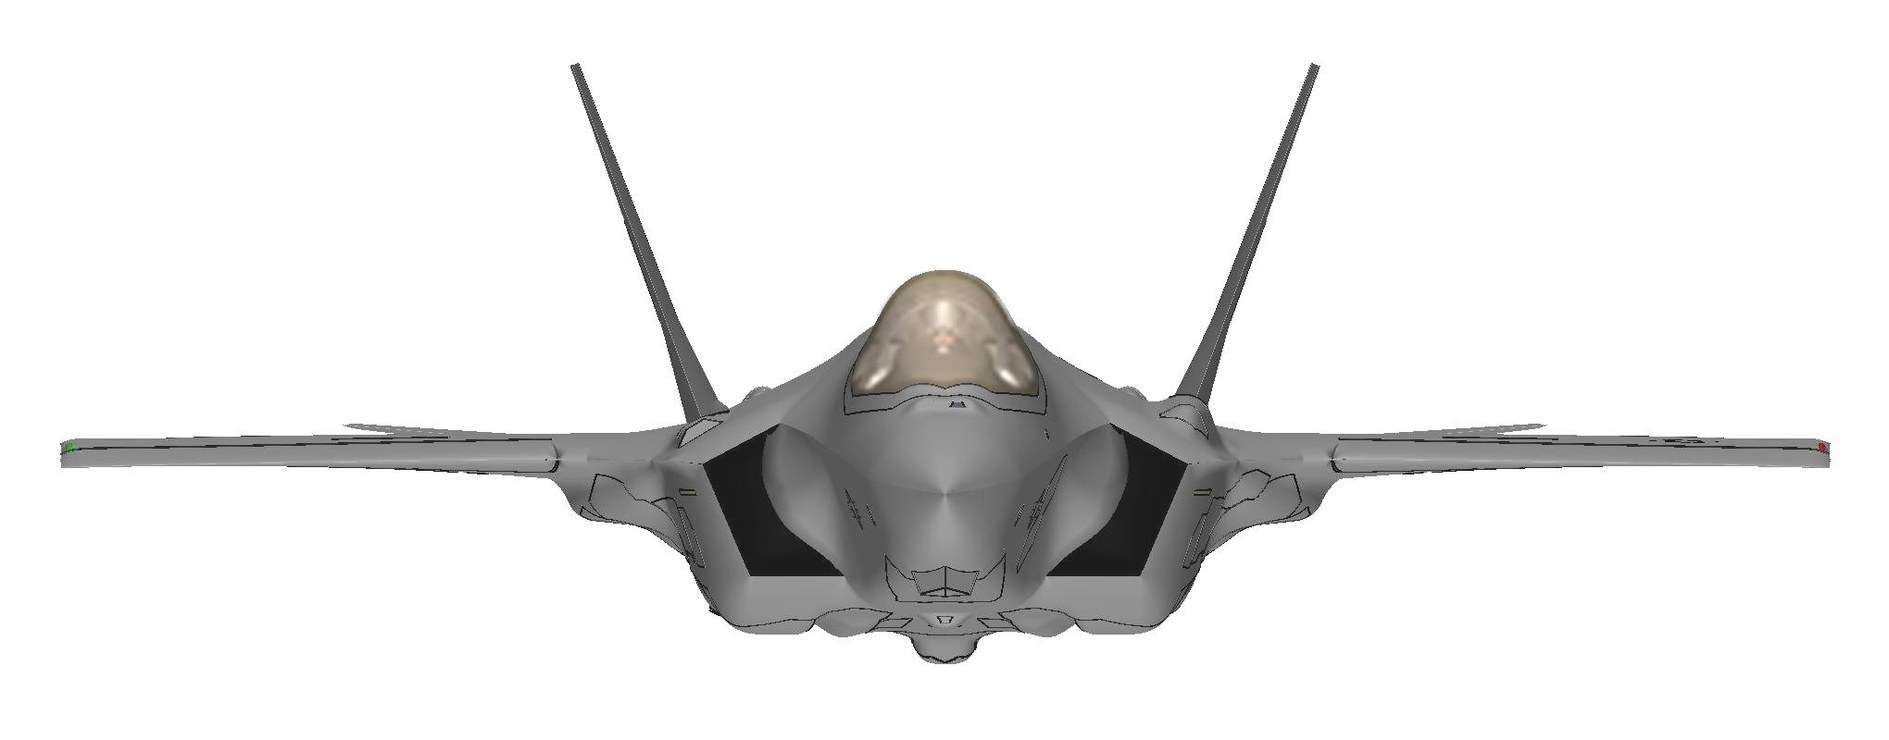 What does it actually mean when we say 'fifth-generation' fighter?